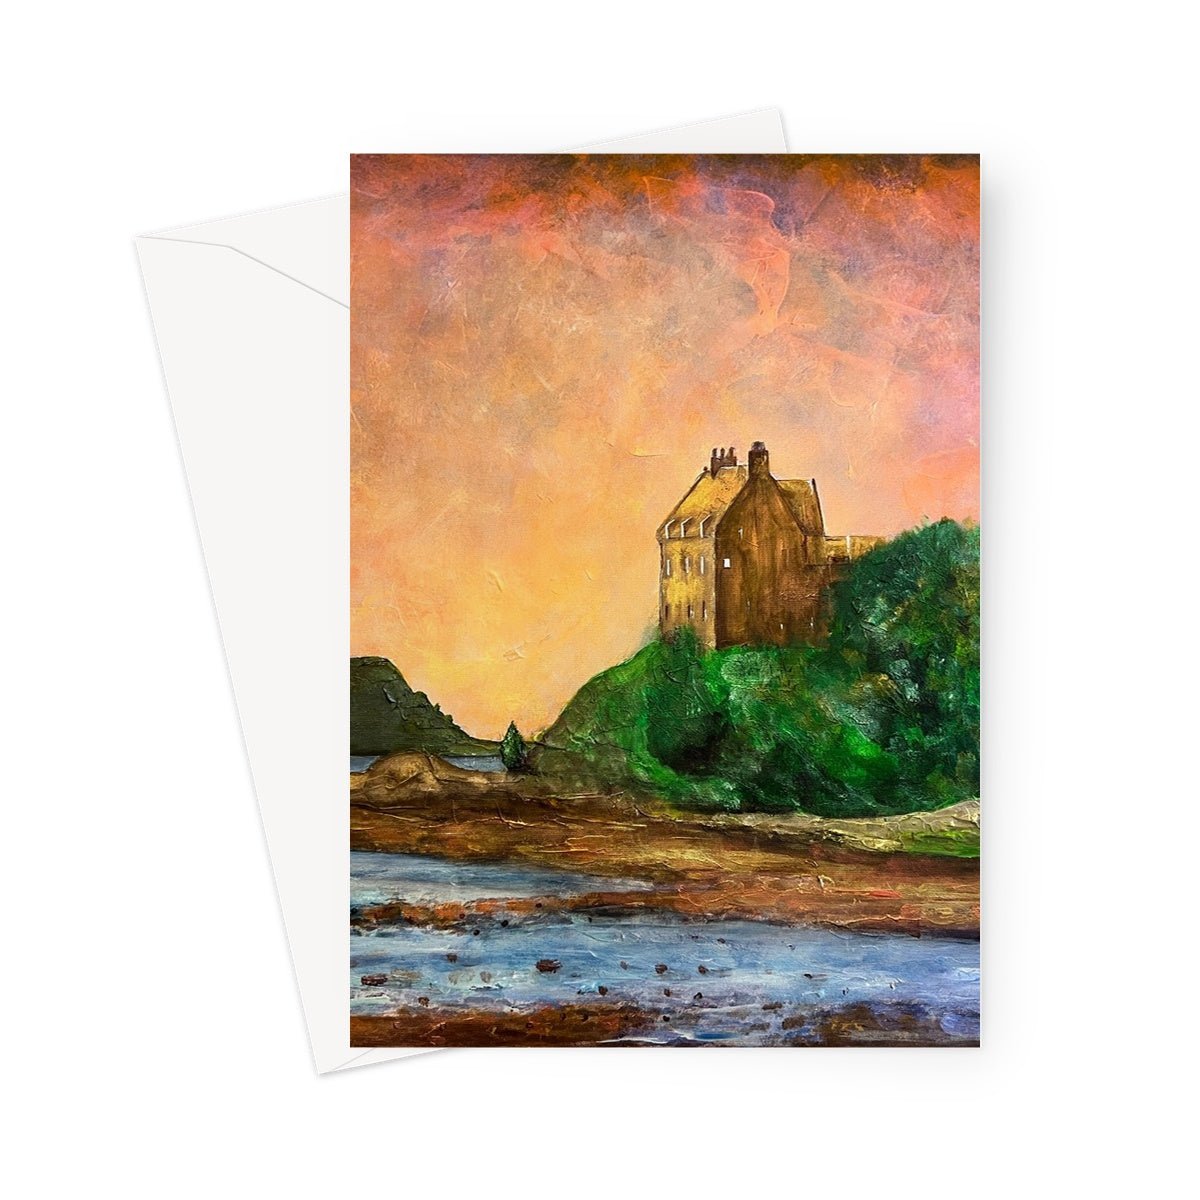 Duntrune Castle Art Gifts Greeting Card-Greetings Cards-Historic & Iconic Scotland Art Gallery-5"x7"-10 Cards-Paintings, Prints, Homeware, Art Gifts From Scotland By Scottish Artist Kevin Hunter